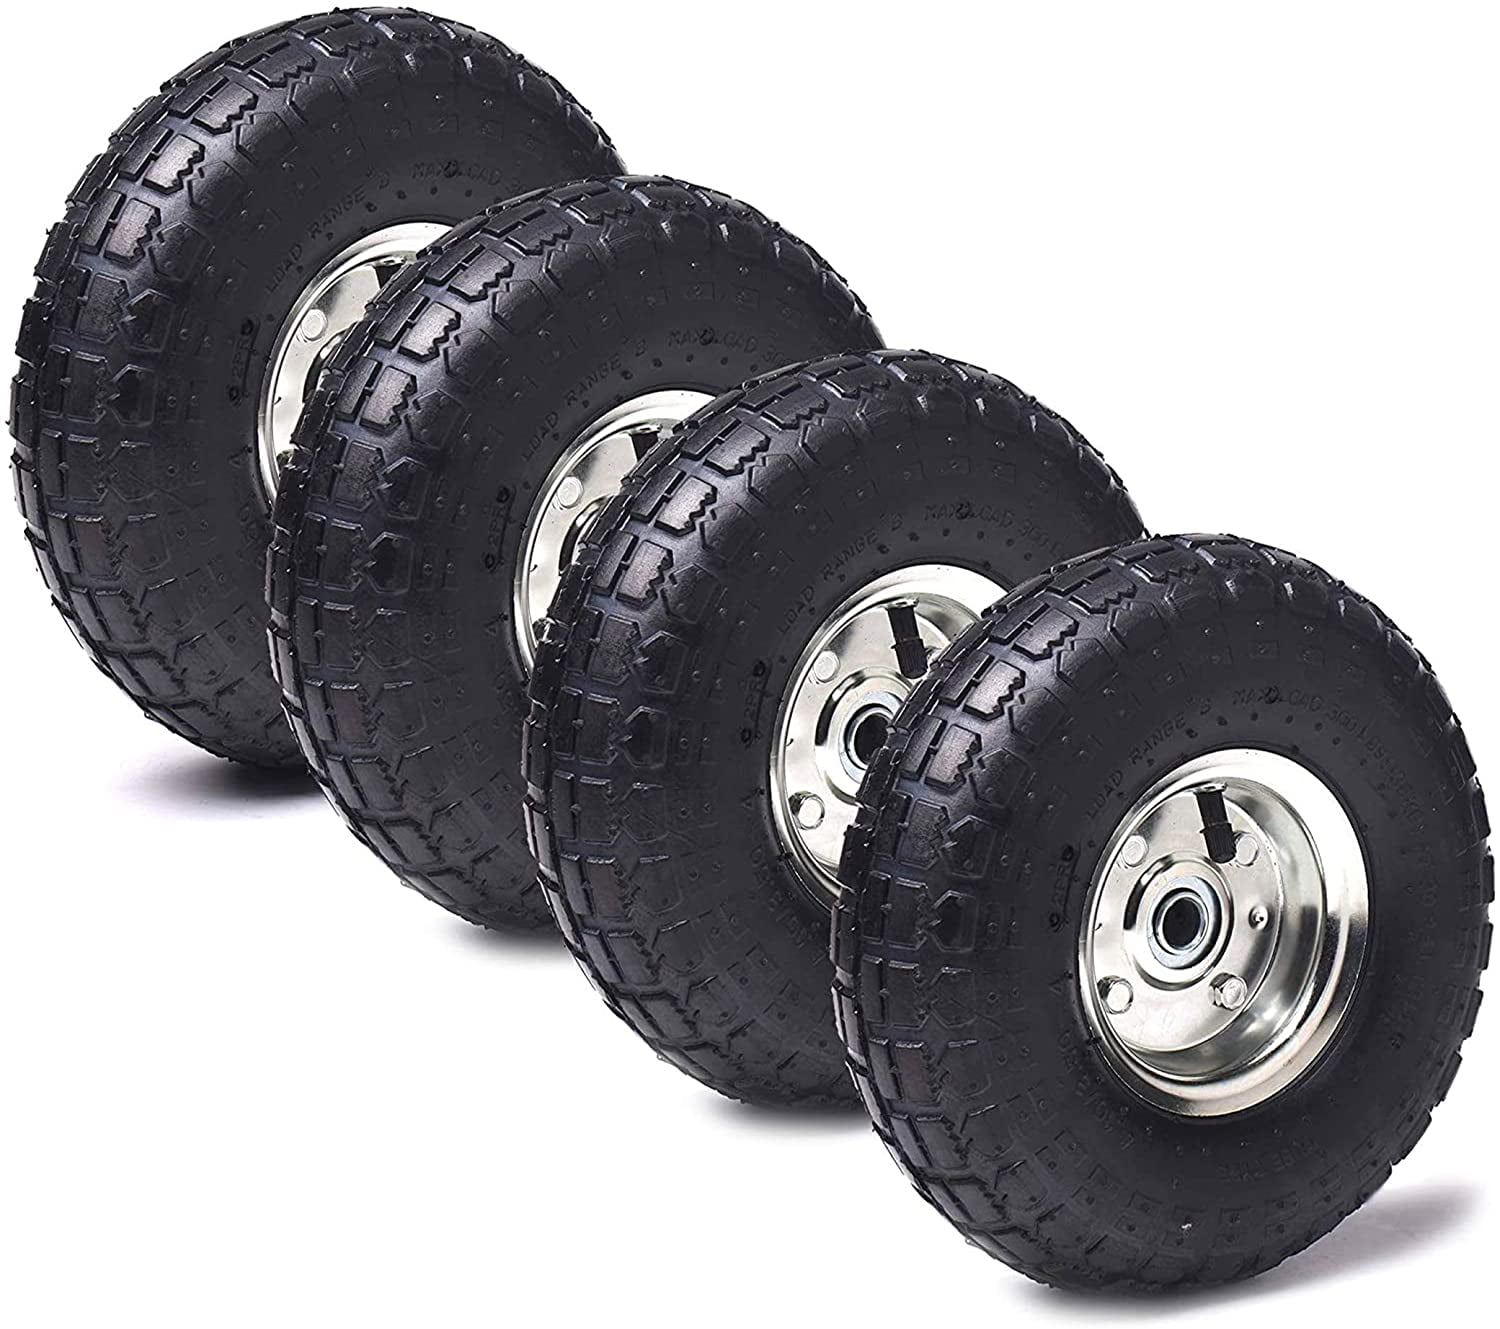 Winisok 4.10/3.50-4 Tire Wheels Flat Free 10 Heavy Duty Solid Replacement Tire with 5/8’’ Bearings for Wagon/Gorilla Carts/Wheelbarrow/Hand Truck/Generators 2 Pack 